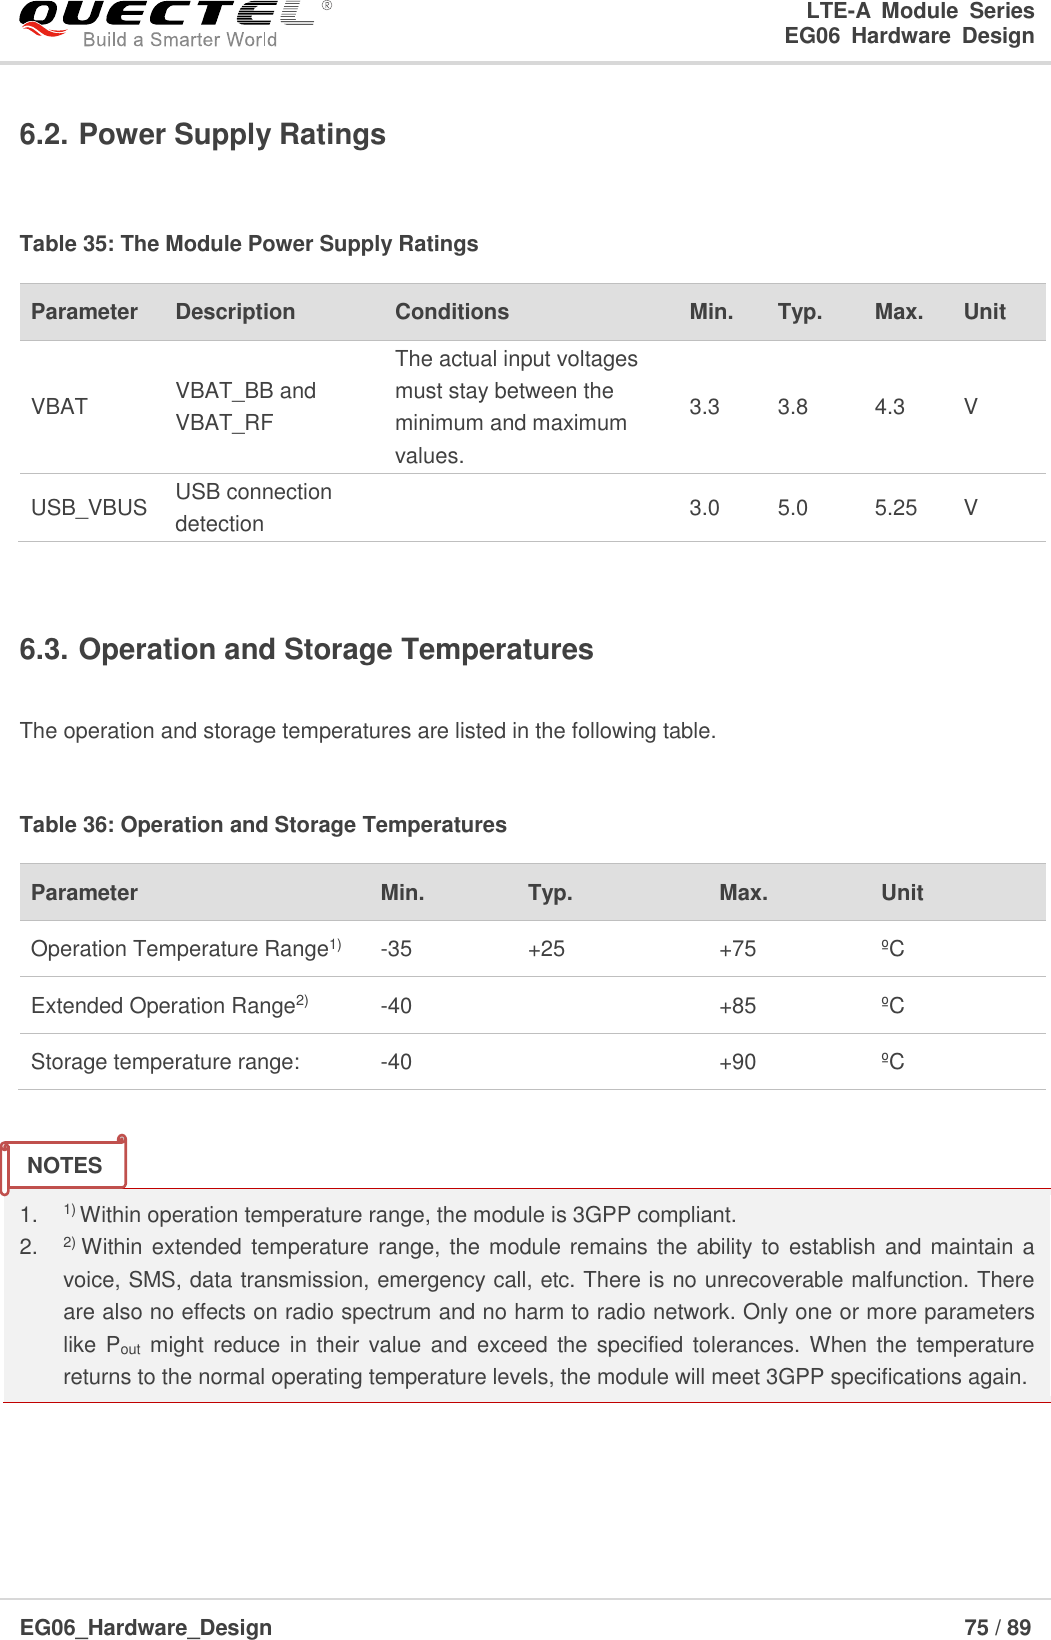 LTE-A  Module  Series                                                  EG06  Hardware  Design  EG06_Hardware_Design                                                               75 / 89    6.2. Power Supply Ratings  Table 35: The Module Power Supply Ratings  6.3. Operation and Storage Temperatures  The operation and storage temperatures are listed in the following table.  Table 36: Operation and Storage Temperatures   1. 1) Within operation temperature range, the module is 3GPP compliant. 2. 2) Within extended temperature range, the module remains the ability to establish  and maintain a voice, SMS, data transmission, emergency call, etc. There is no unrecoverable malfunction. There are also no effects on radio spectrum and no harm to radio network. Only one or more parameters like Pout might reduce in  their  value and  exceed  the specified tolerances. When the  temperature returns to the normal operating temperature levels, the module will meet 3GPP specifications again.  Parameter Description Conditions Min. Typ. Max. Unit VBAT VBAT_BB and VBAT_RF The actual input voltages must stay between the minimum and maximum values. 3.3 3.8 4.3 V USB_VBUS USB connection detection  3.0 5.0 5.25 V Parameter Min. Typ. Max. Unit Operation Temperature Range1) -35 +25 +75 ºC  Extended Operation Range2) -40  +85 ºC  Storage temperature range:   -40  +90 ºC  NOTES   